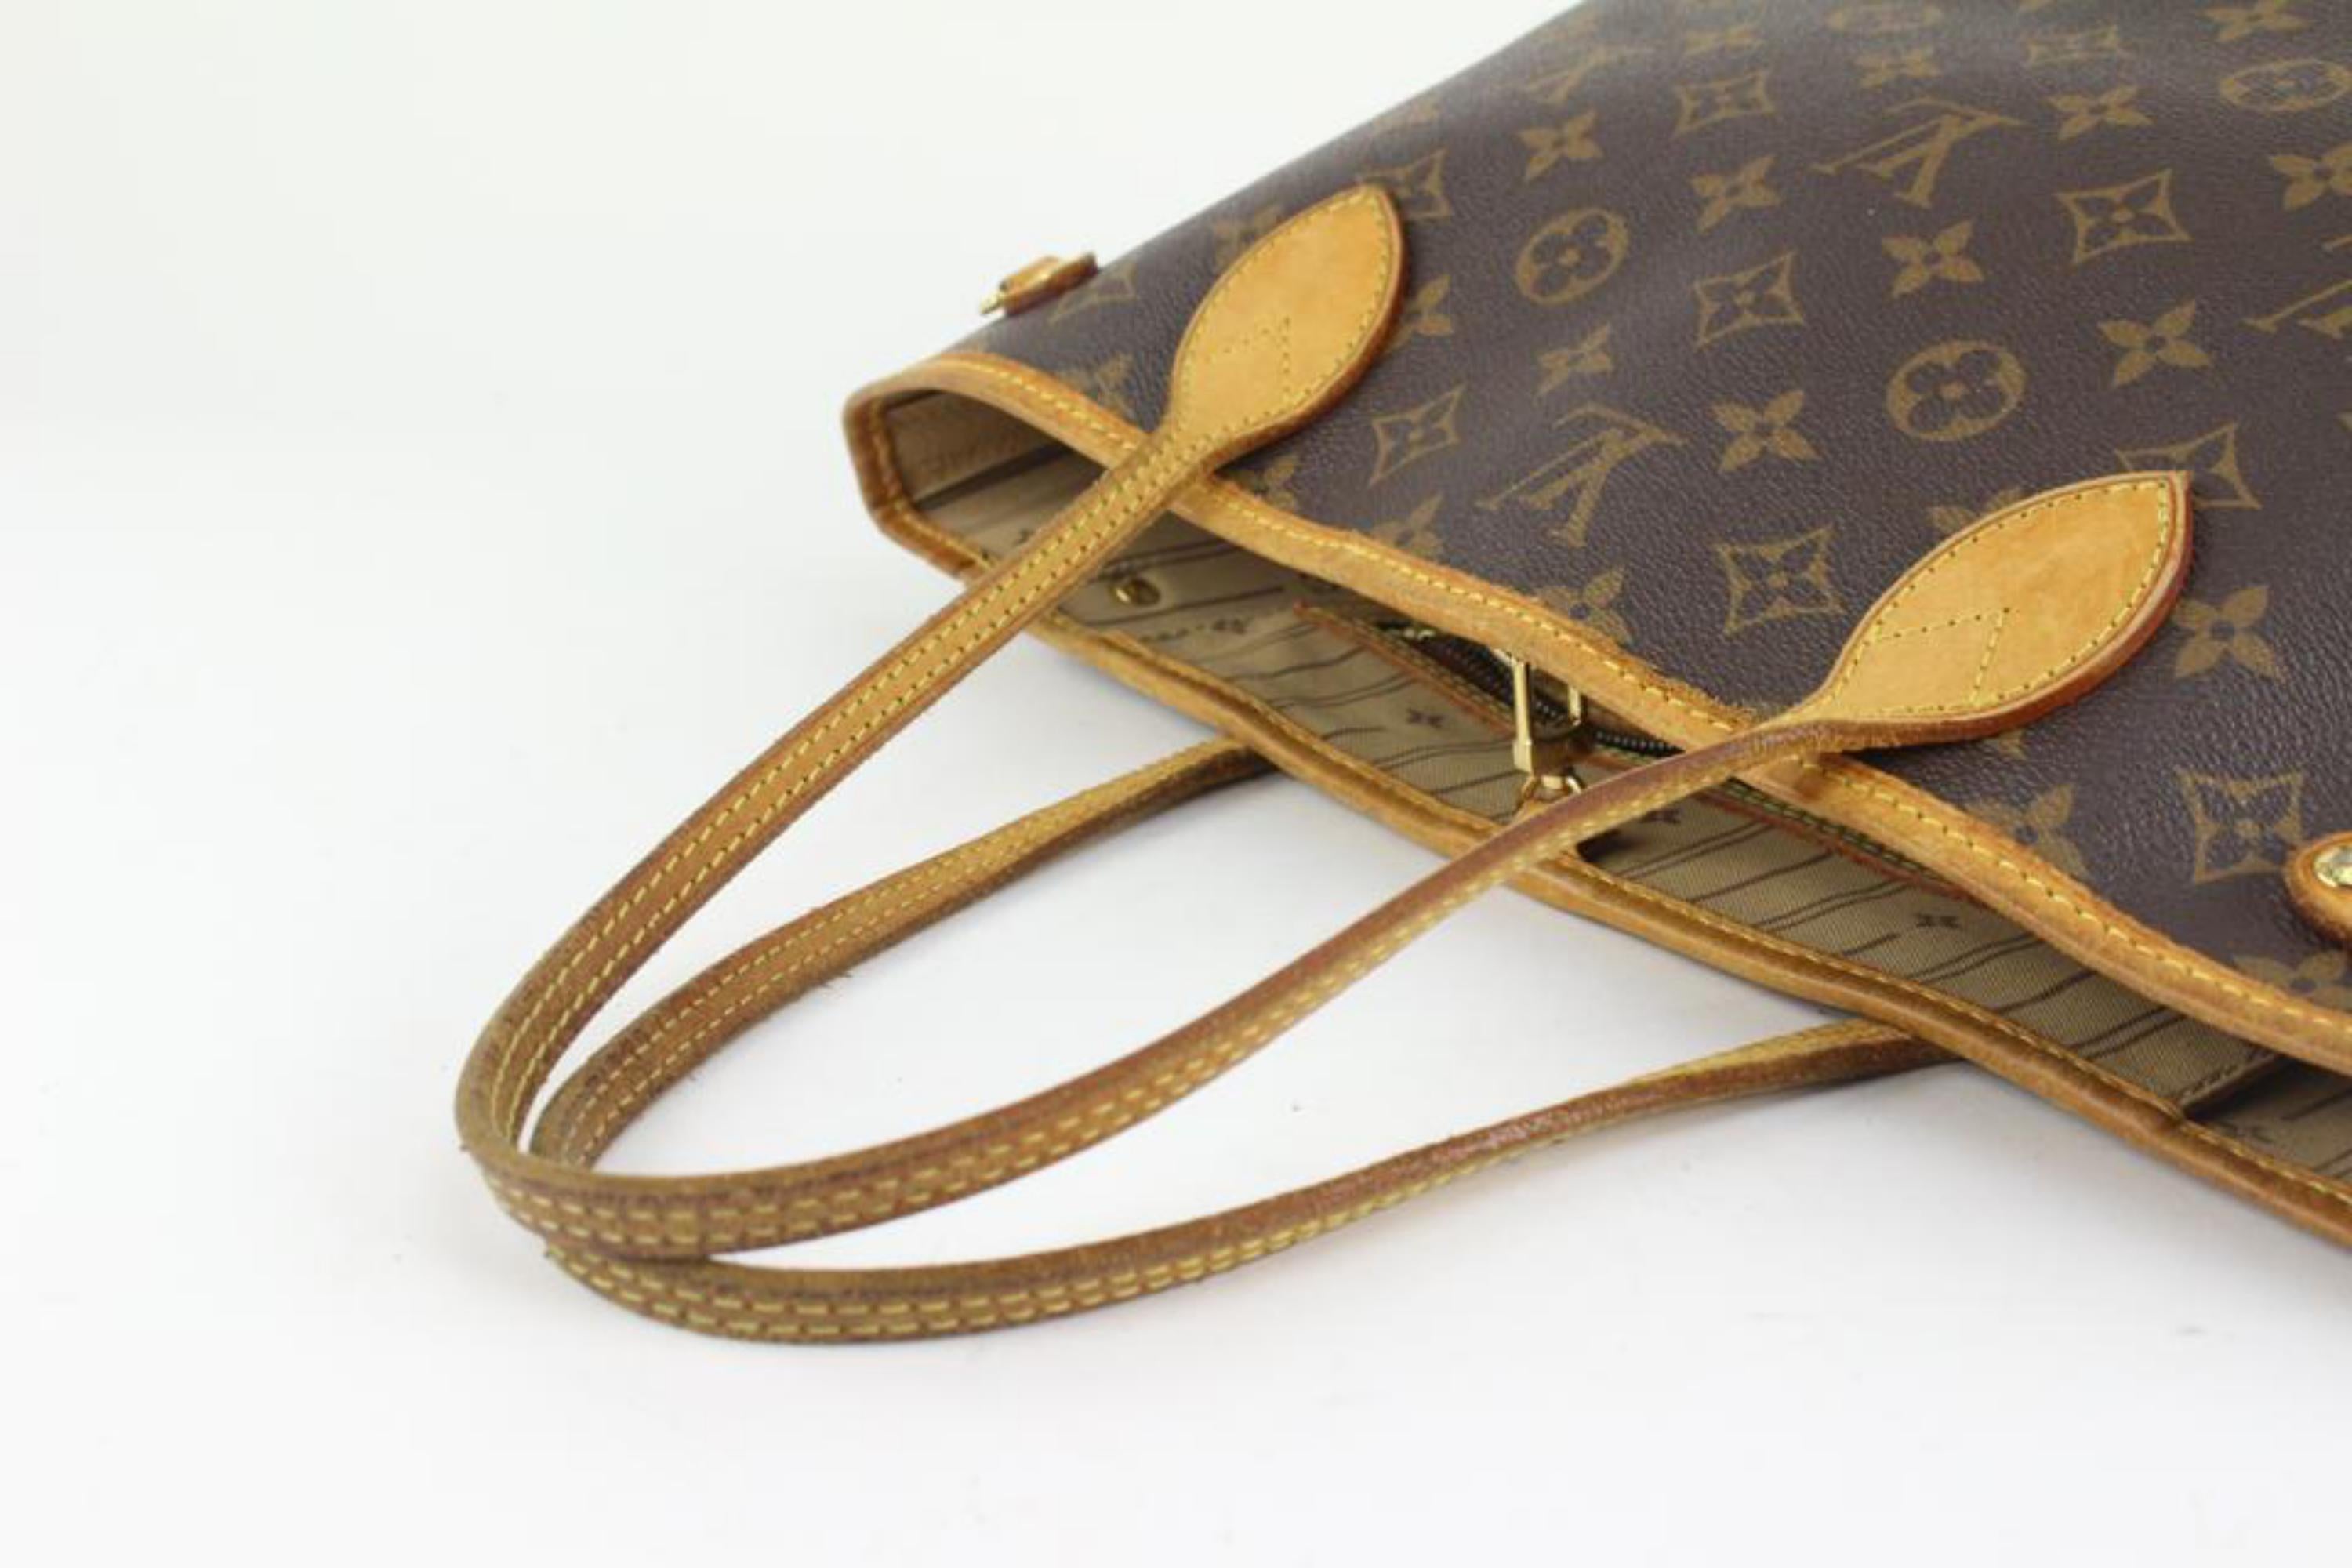 Louis Vuitton Small Monogram Neverfull PM Tote Bag 1215lv6 For Sale 1